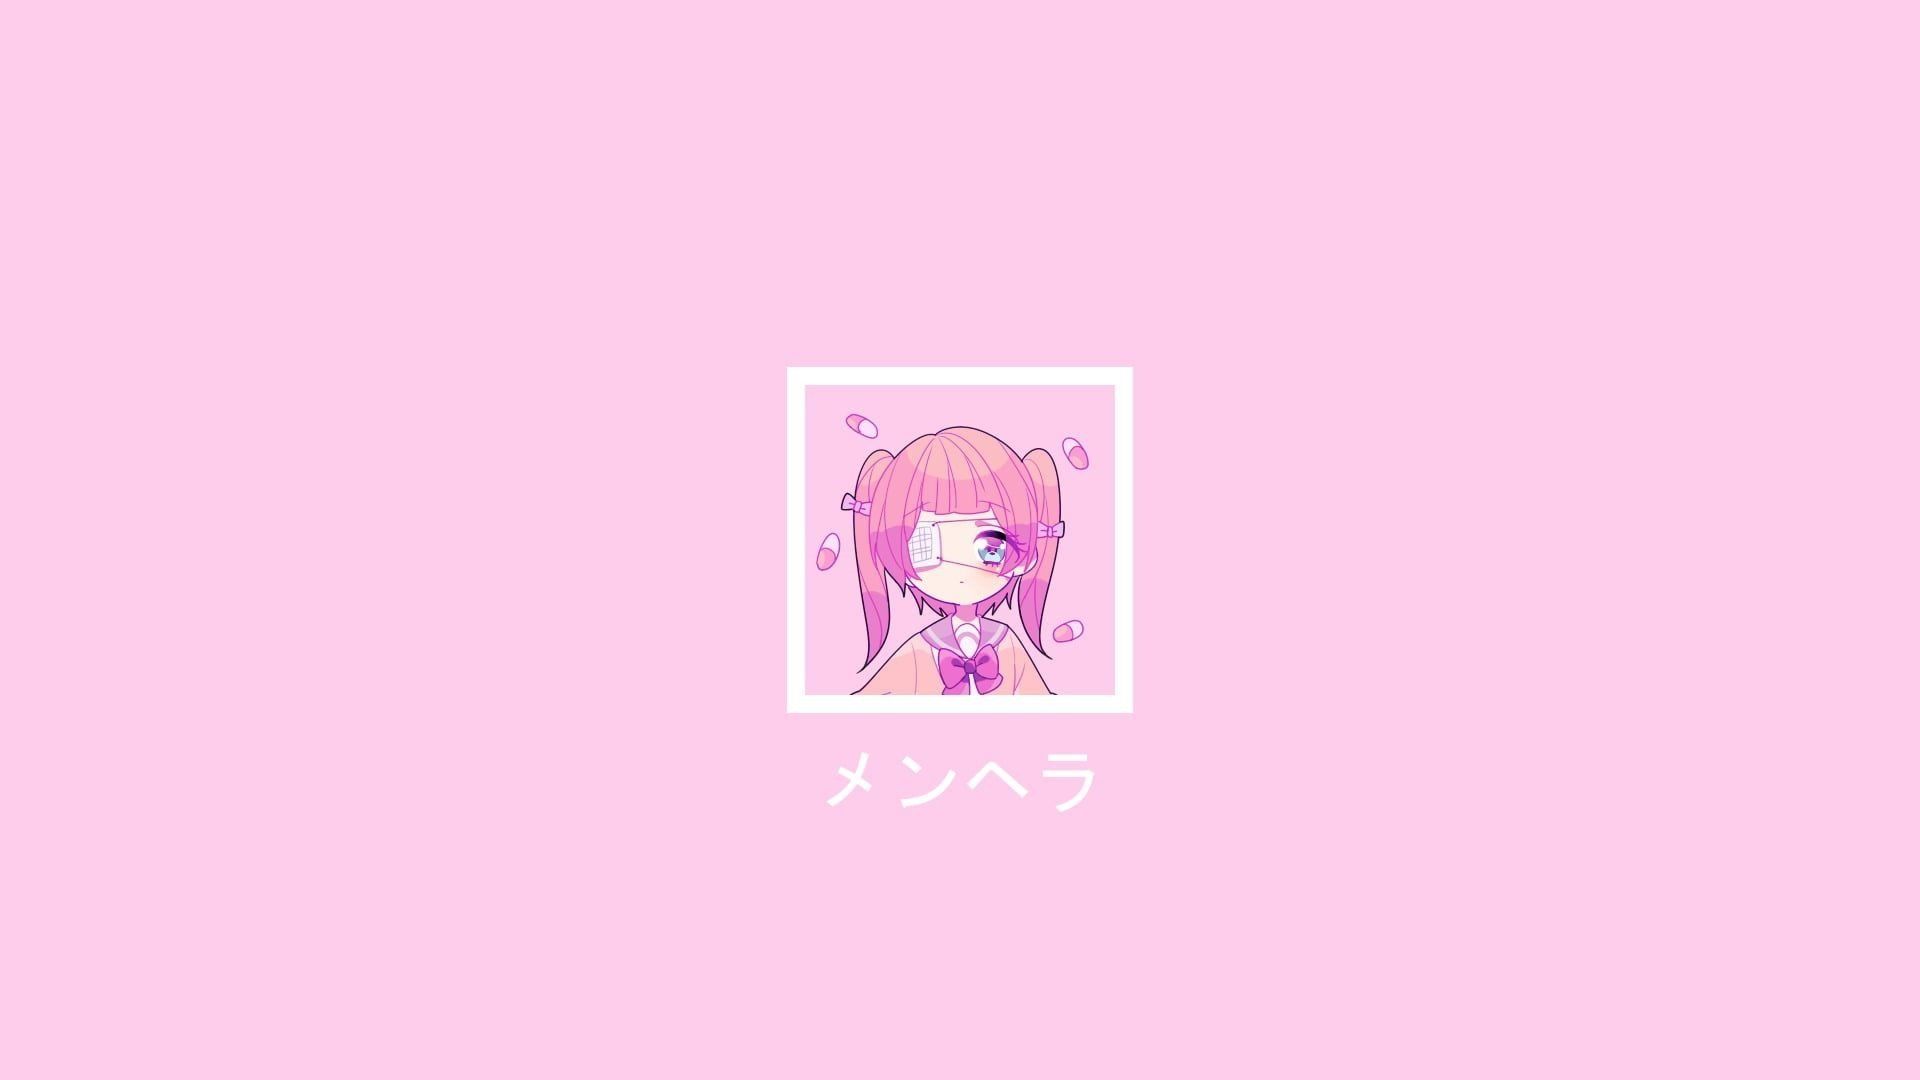 Aesthetic anime girl with a mask on a pink background - Pink anime